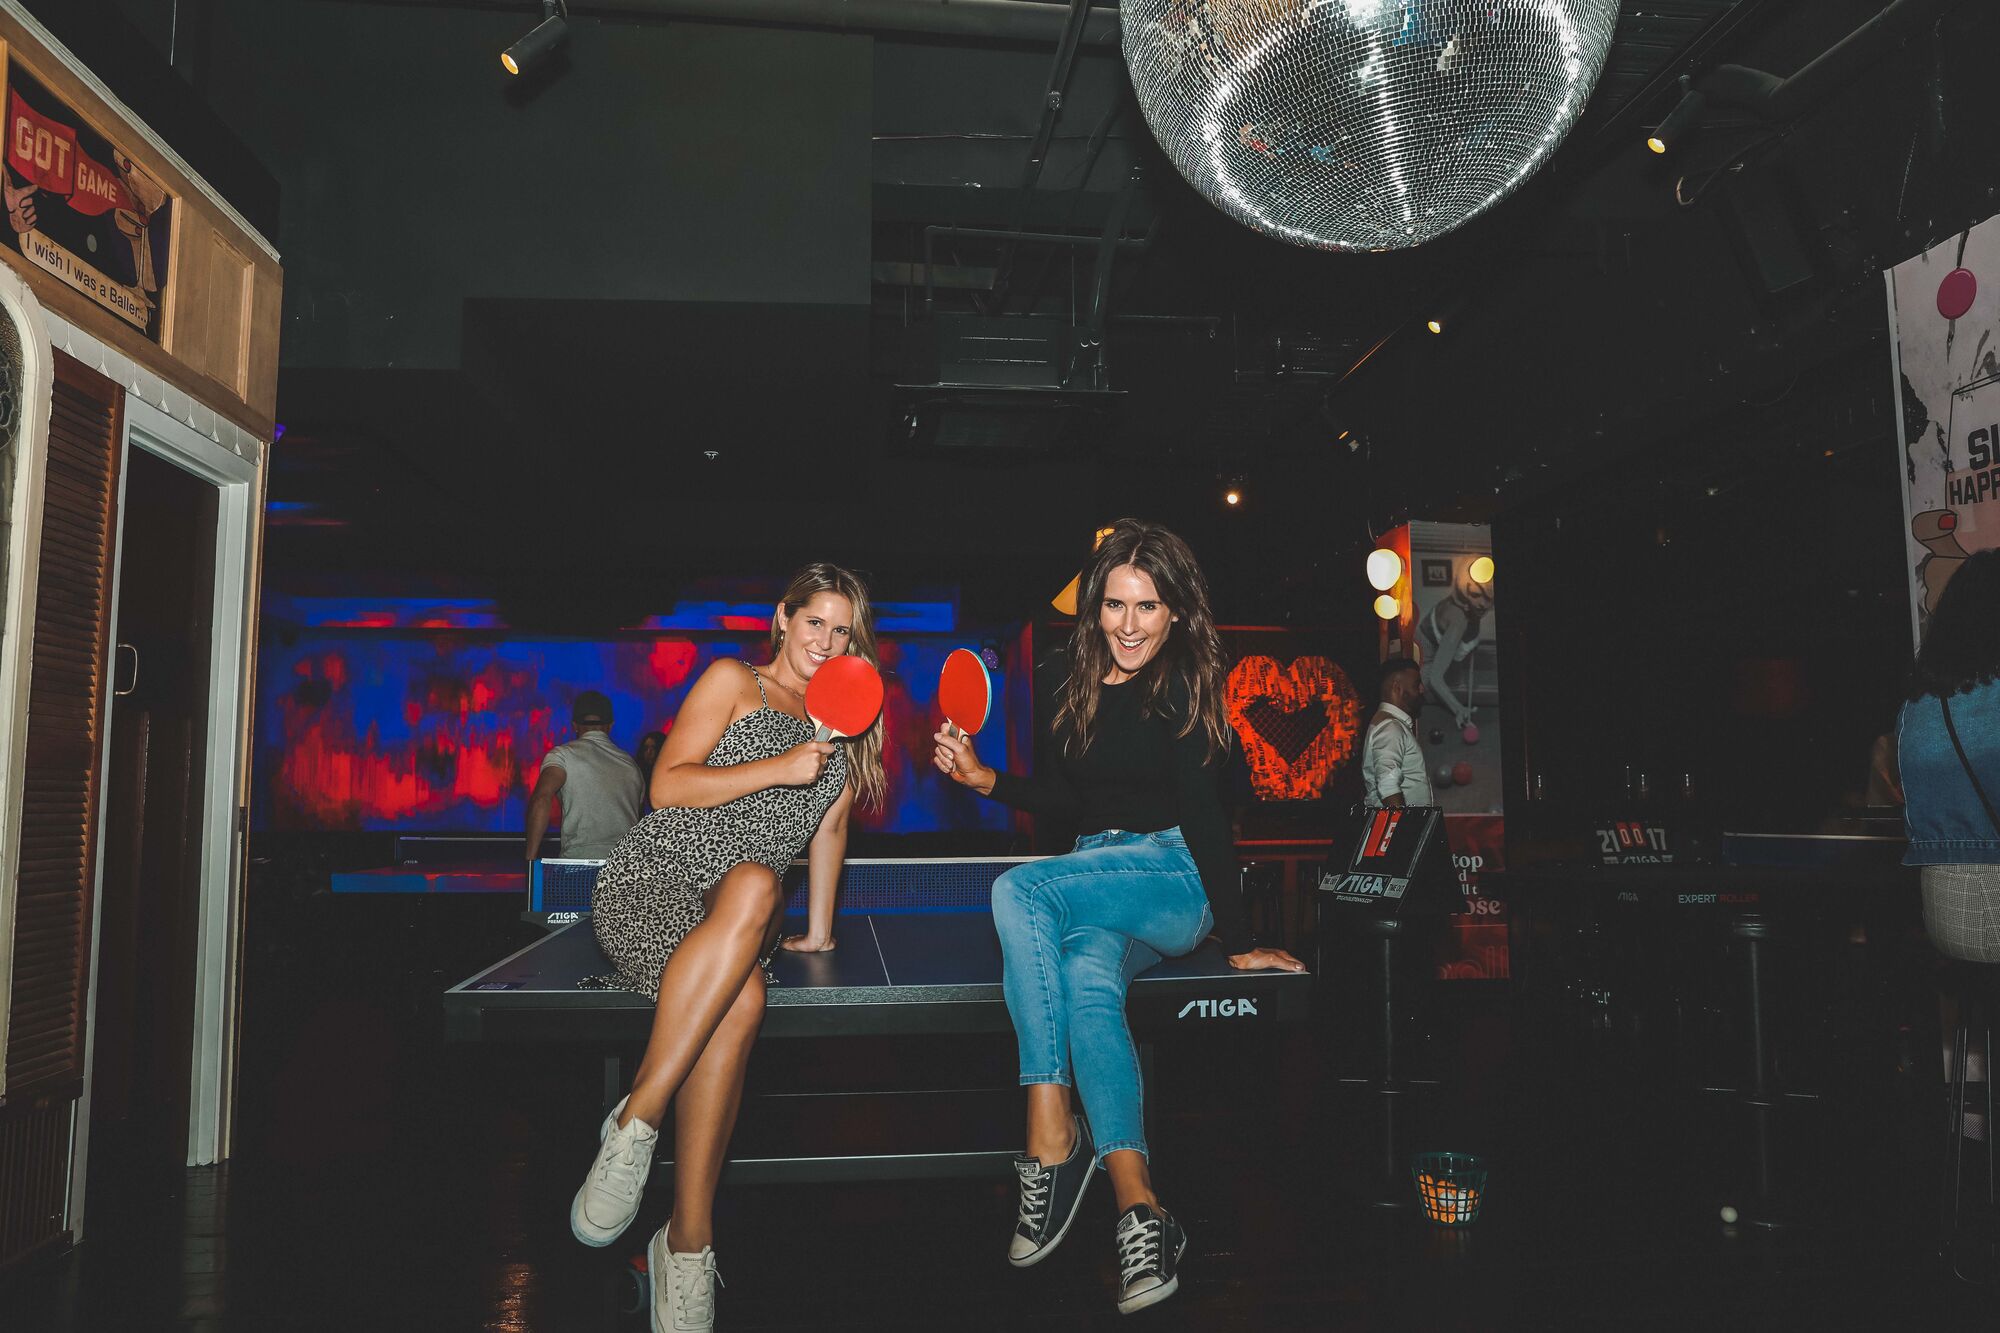 Express Combo: Ping Pong, Darts and Shuffleboard Table (90 minutes) | Ballers Clubhouse Melbourne CBD